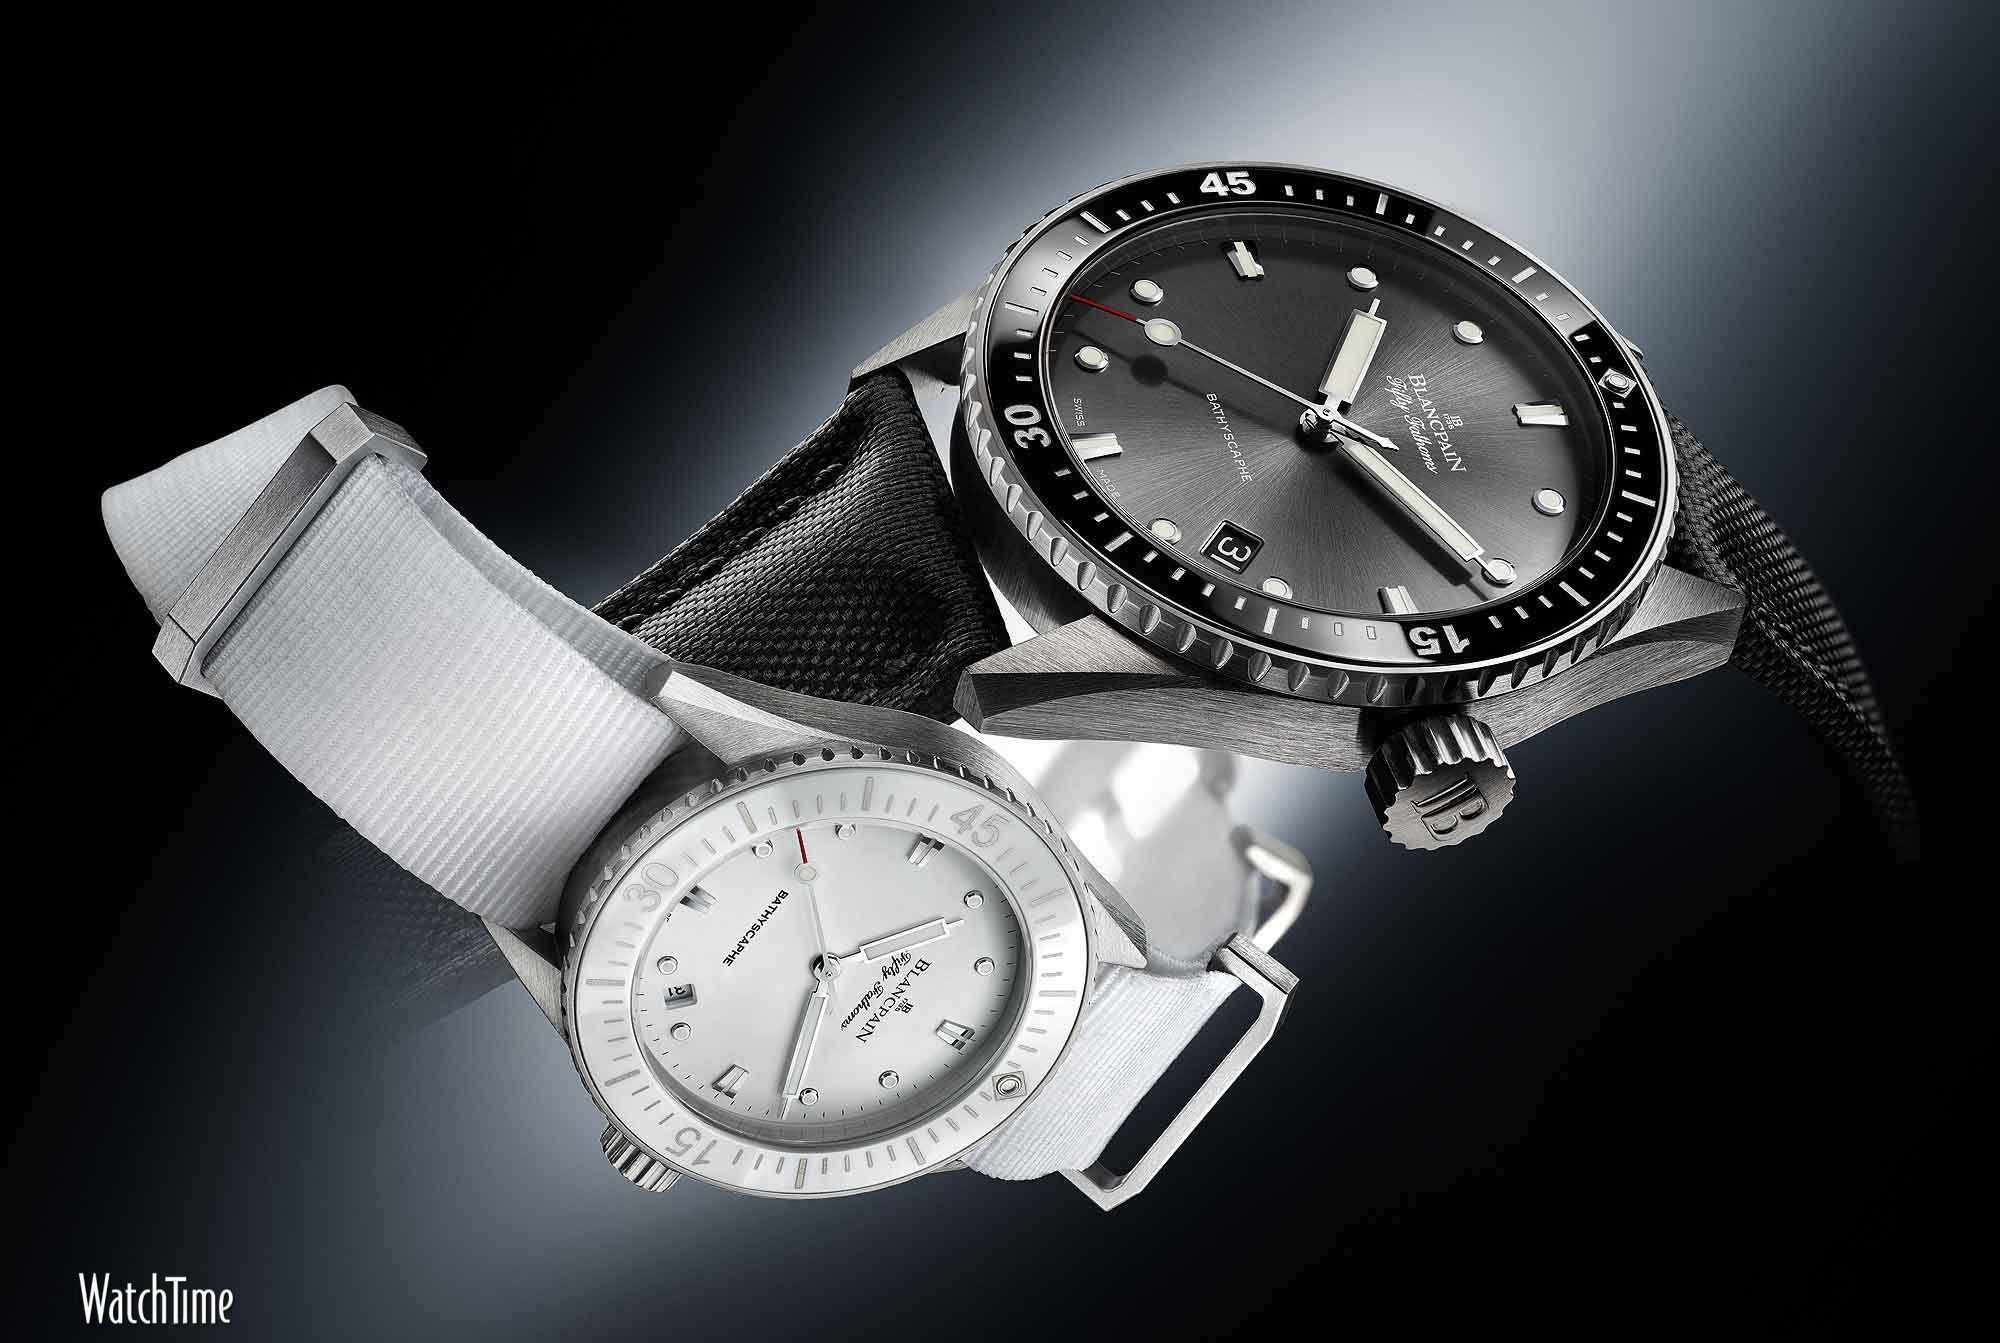 Watch Wallpaper: 10 Divers' Watches › WatchTime's No.1 Watch